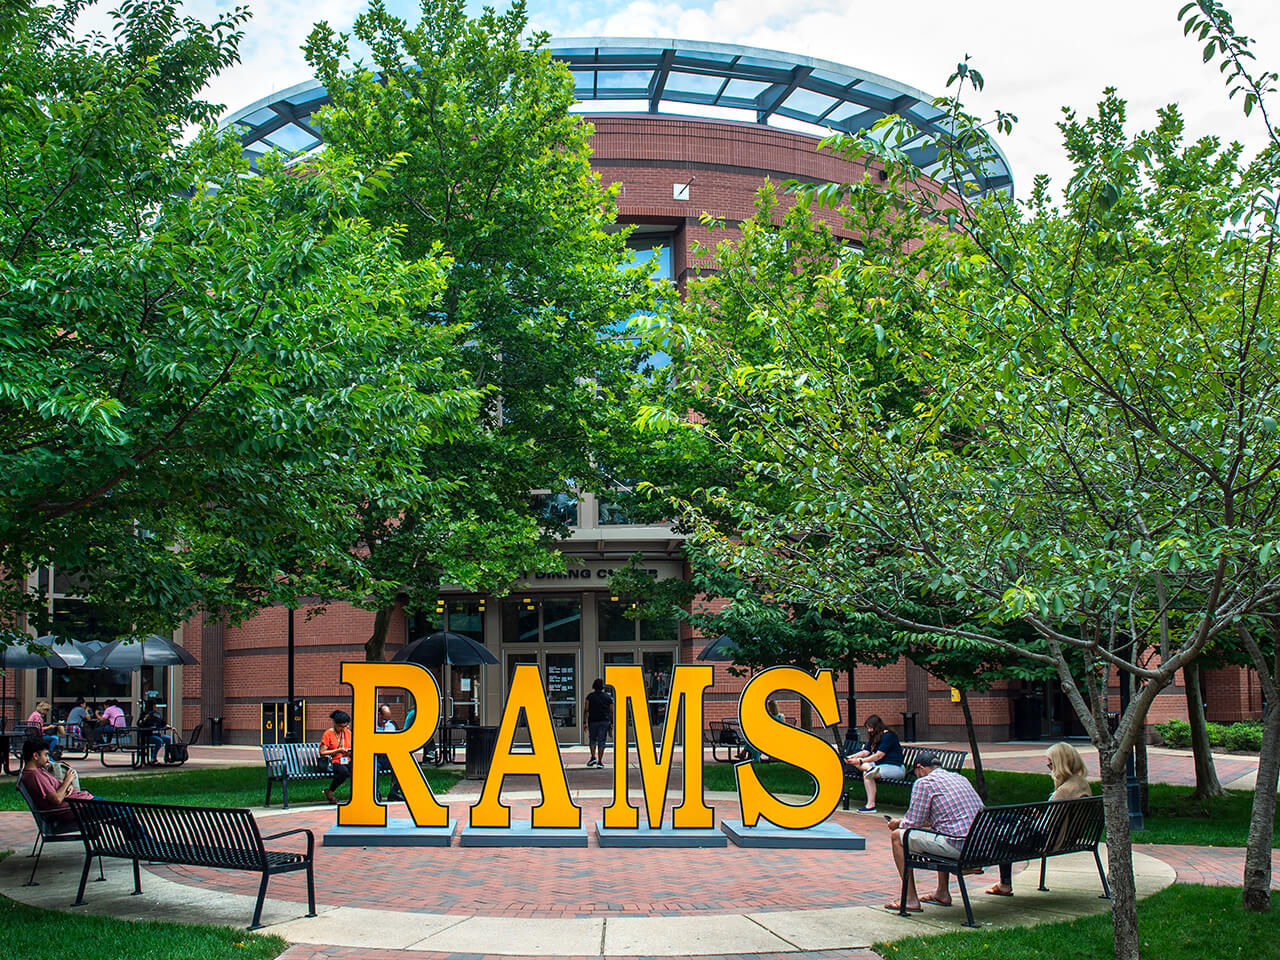 Rams signage spelled in gold letters outdoors